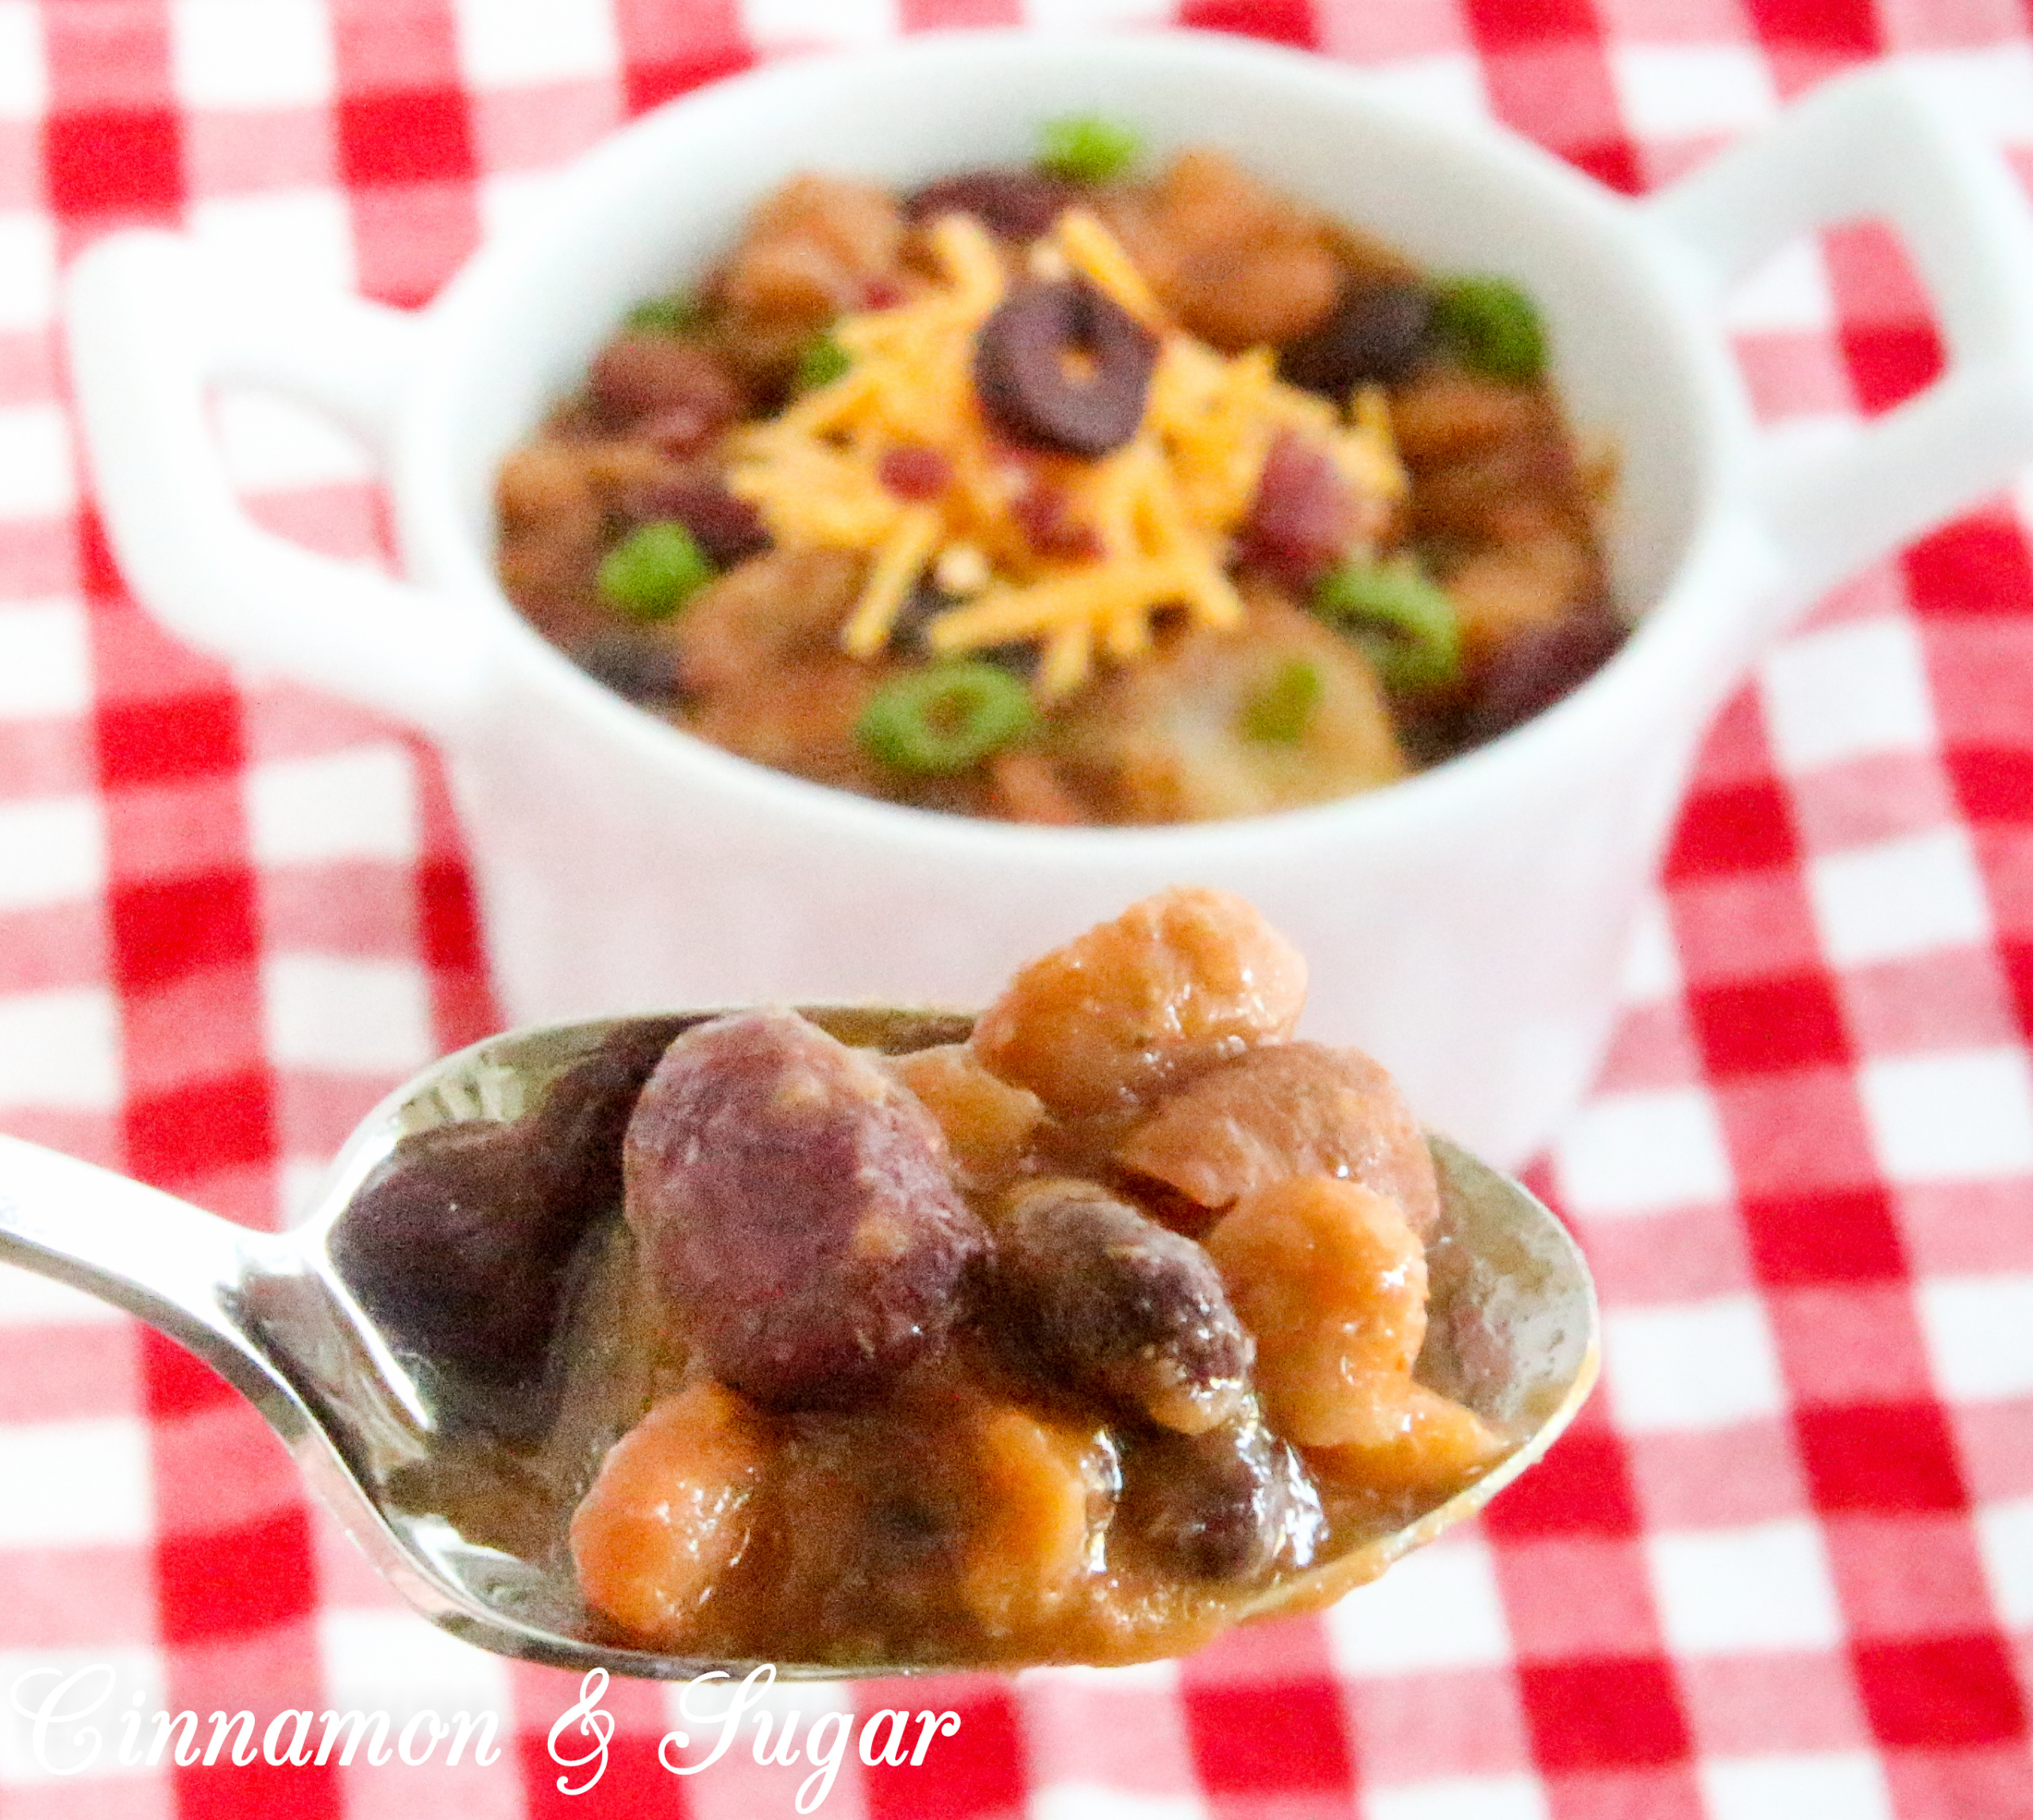 Using canned convenience products, the ease of making Potluck Beans belies the savory deliciousness of this dish, whether served as a side dish or an entrée. Recipe from cozy mystery Sprinkles of Suspicion by Kim Davis.